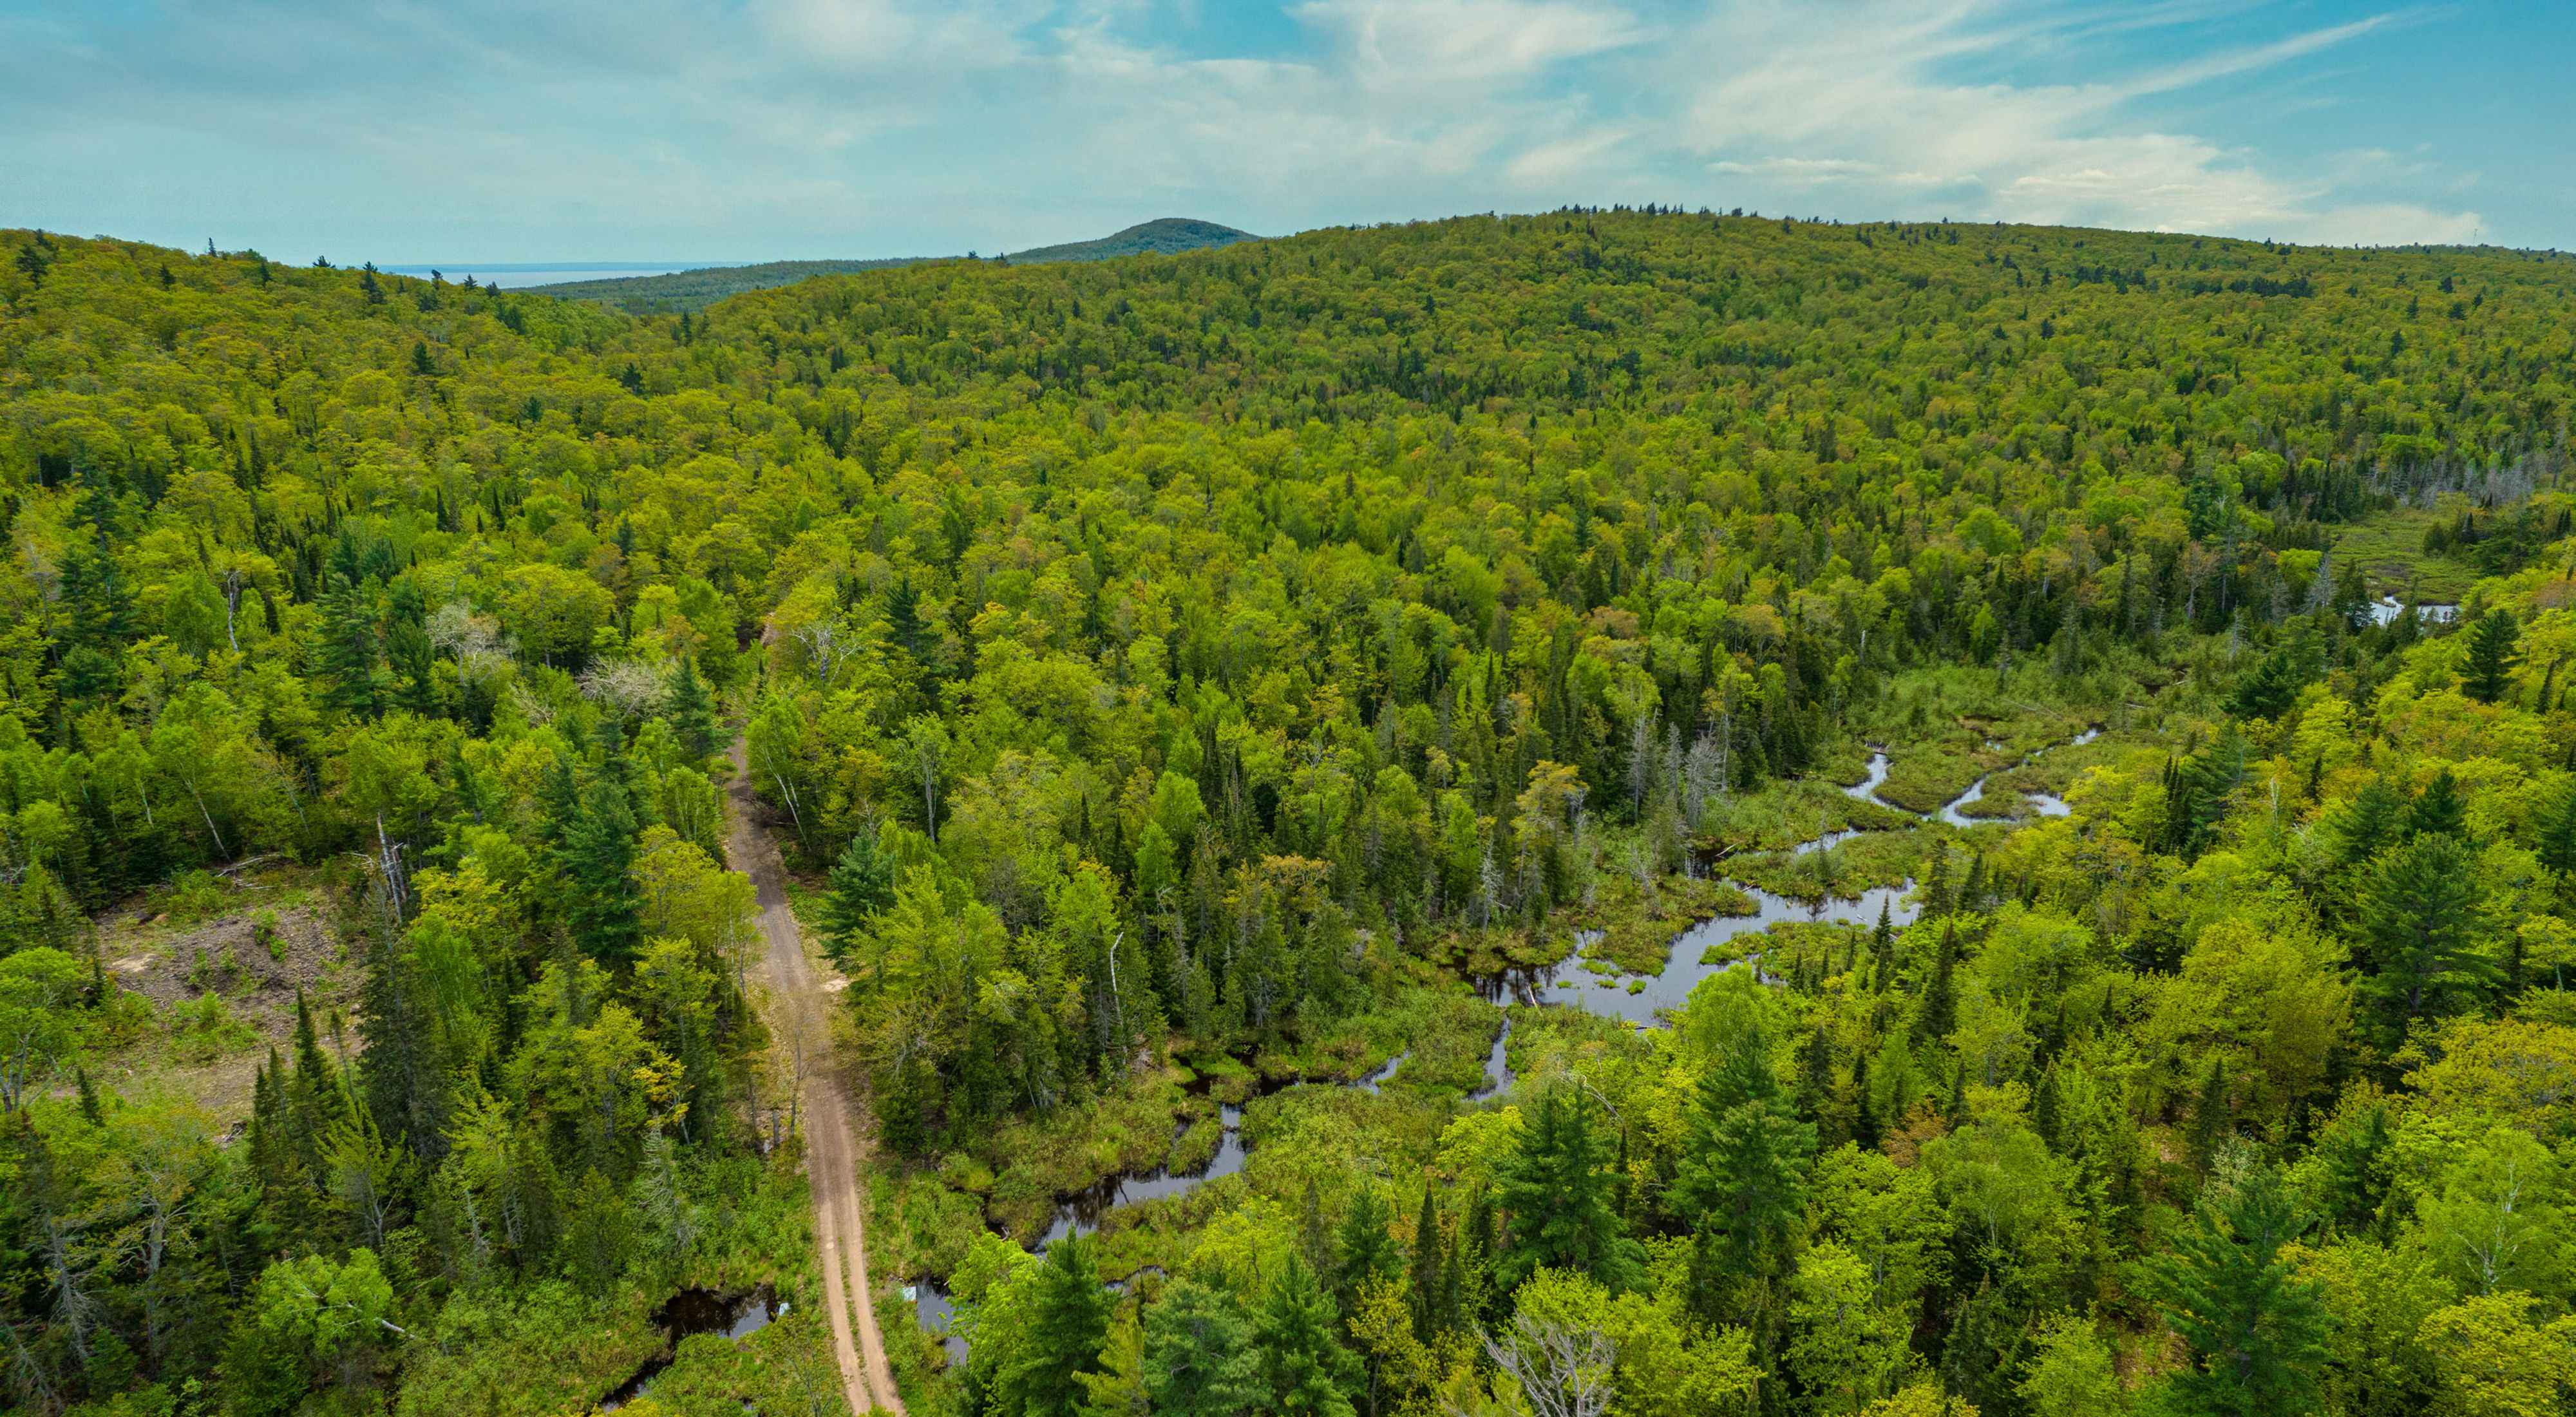 Aerial view of a forest of trees in the Keweenaw with a winding river and dirt road. 